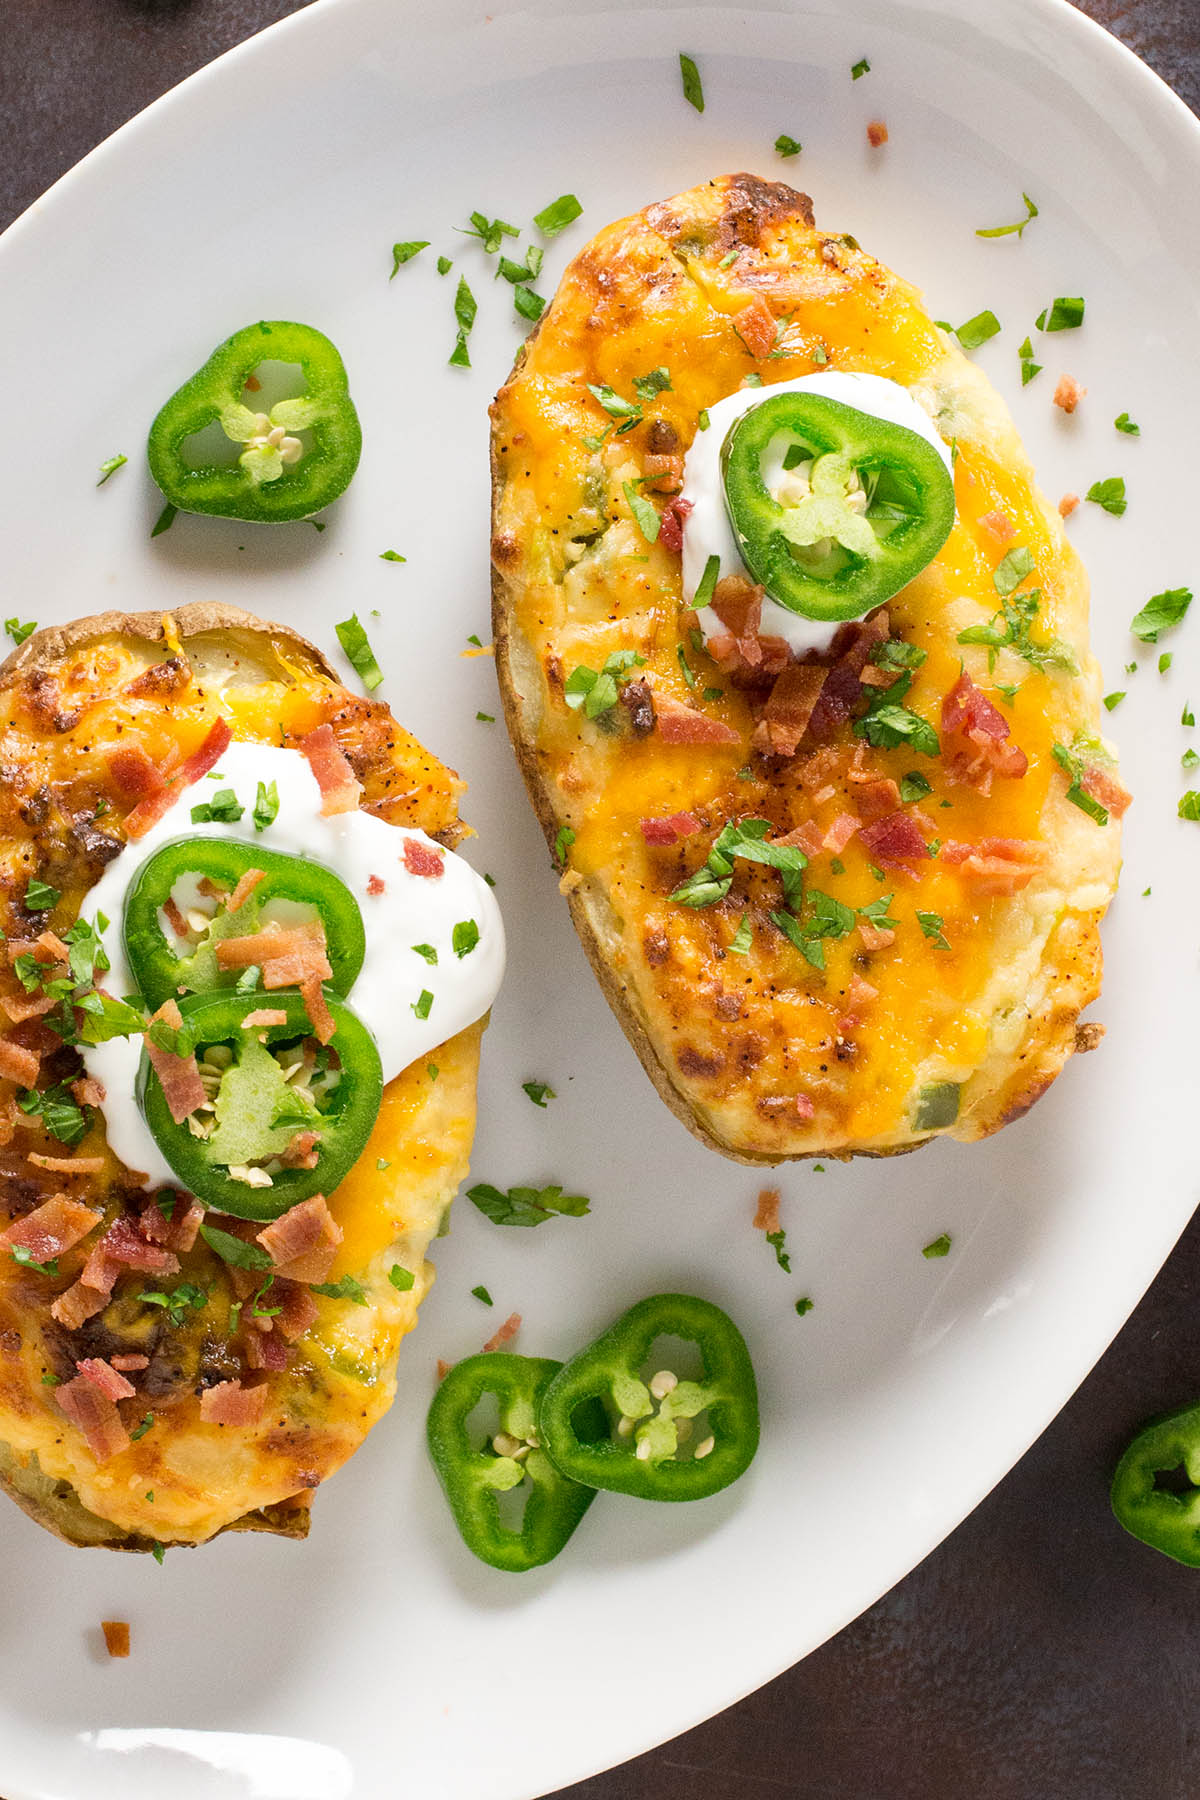 Homemade Jalapeno Popper Twice Baked Potatoes made quick and easy.